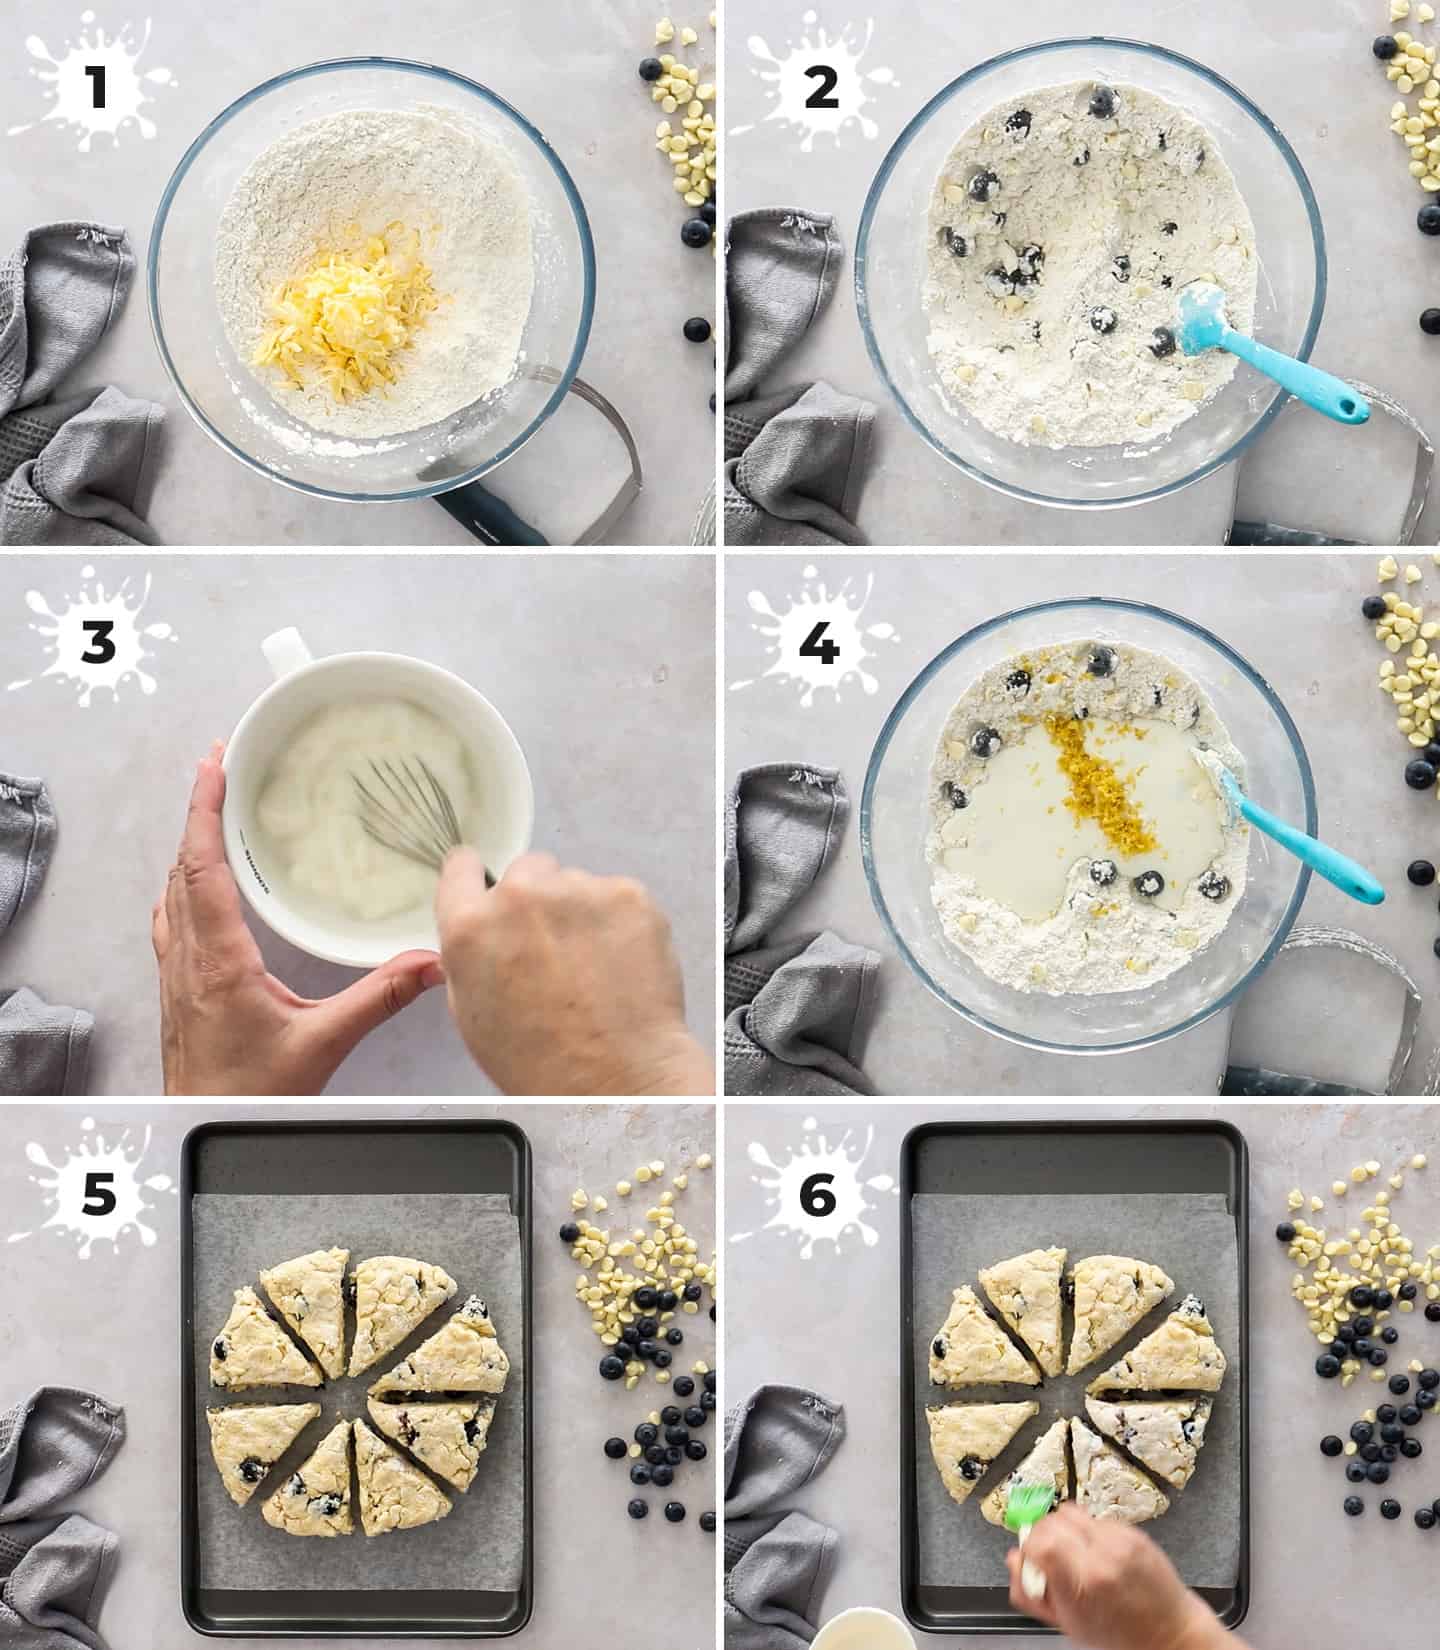 A collage of 6 images showing how to make blueberry white chocolate scones.